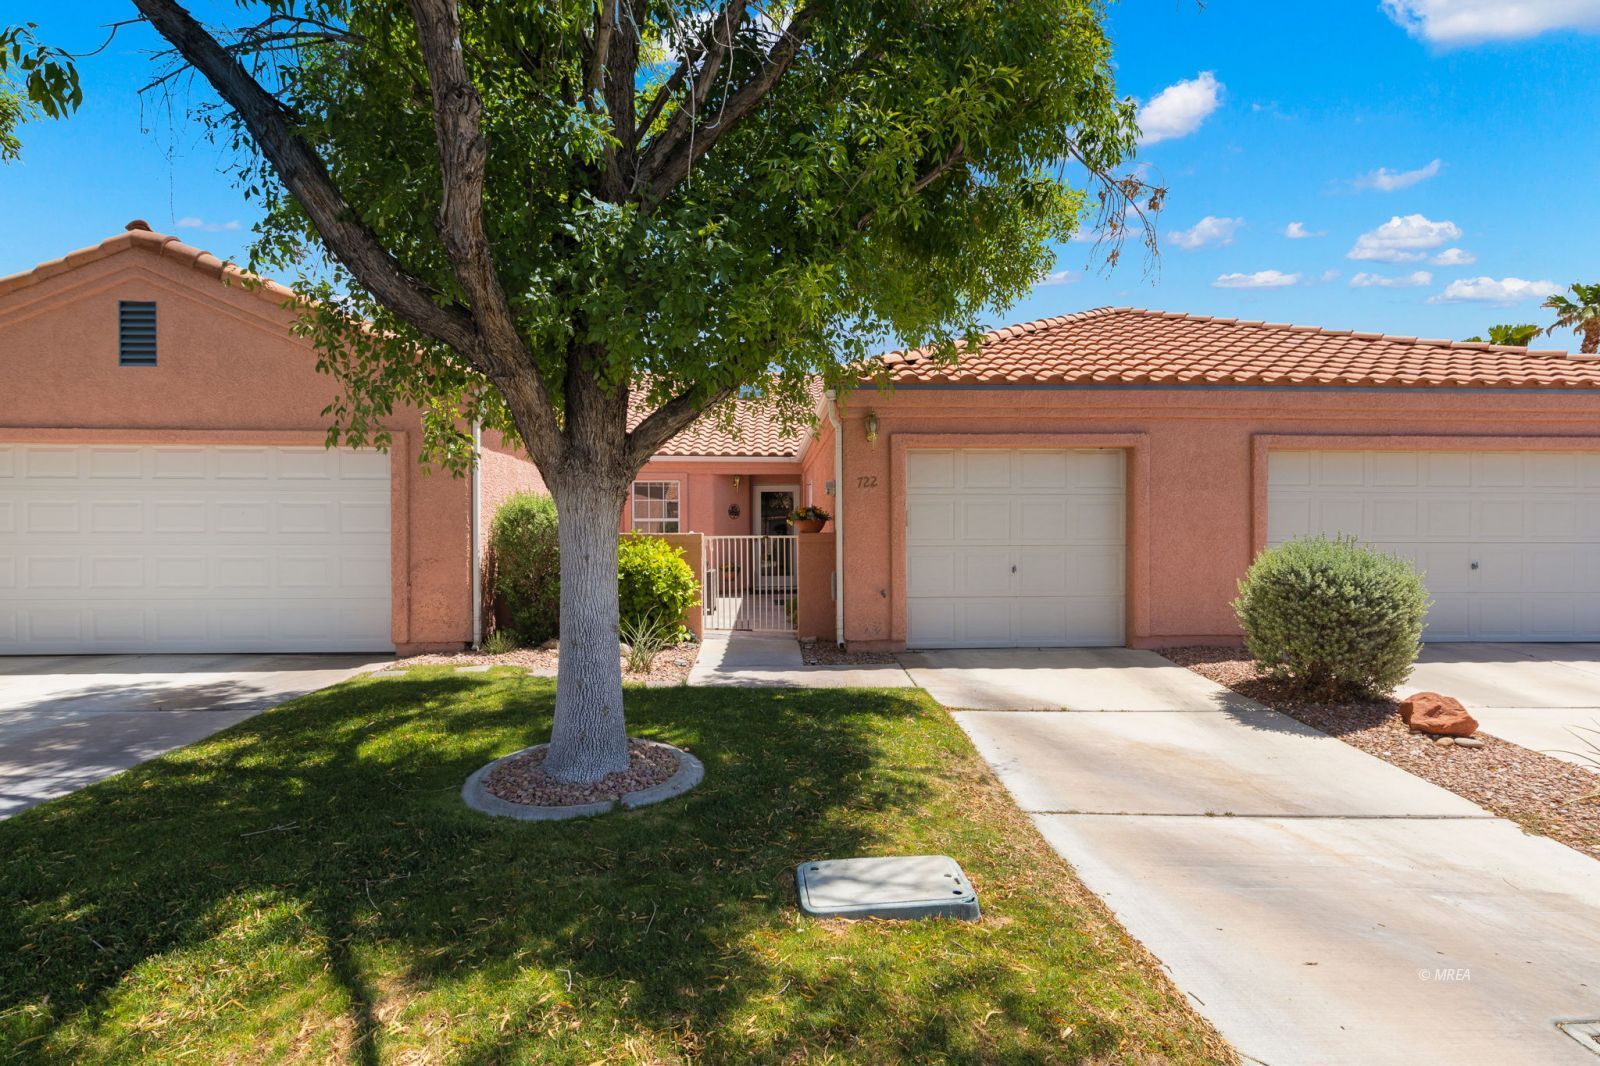 722 Peartree Ln, Mesquite NV 89027